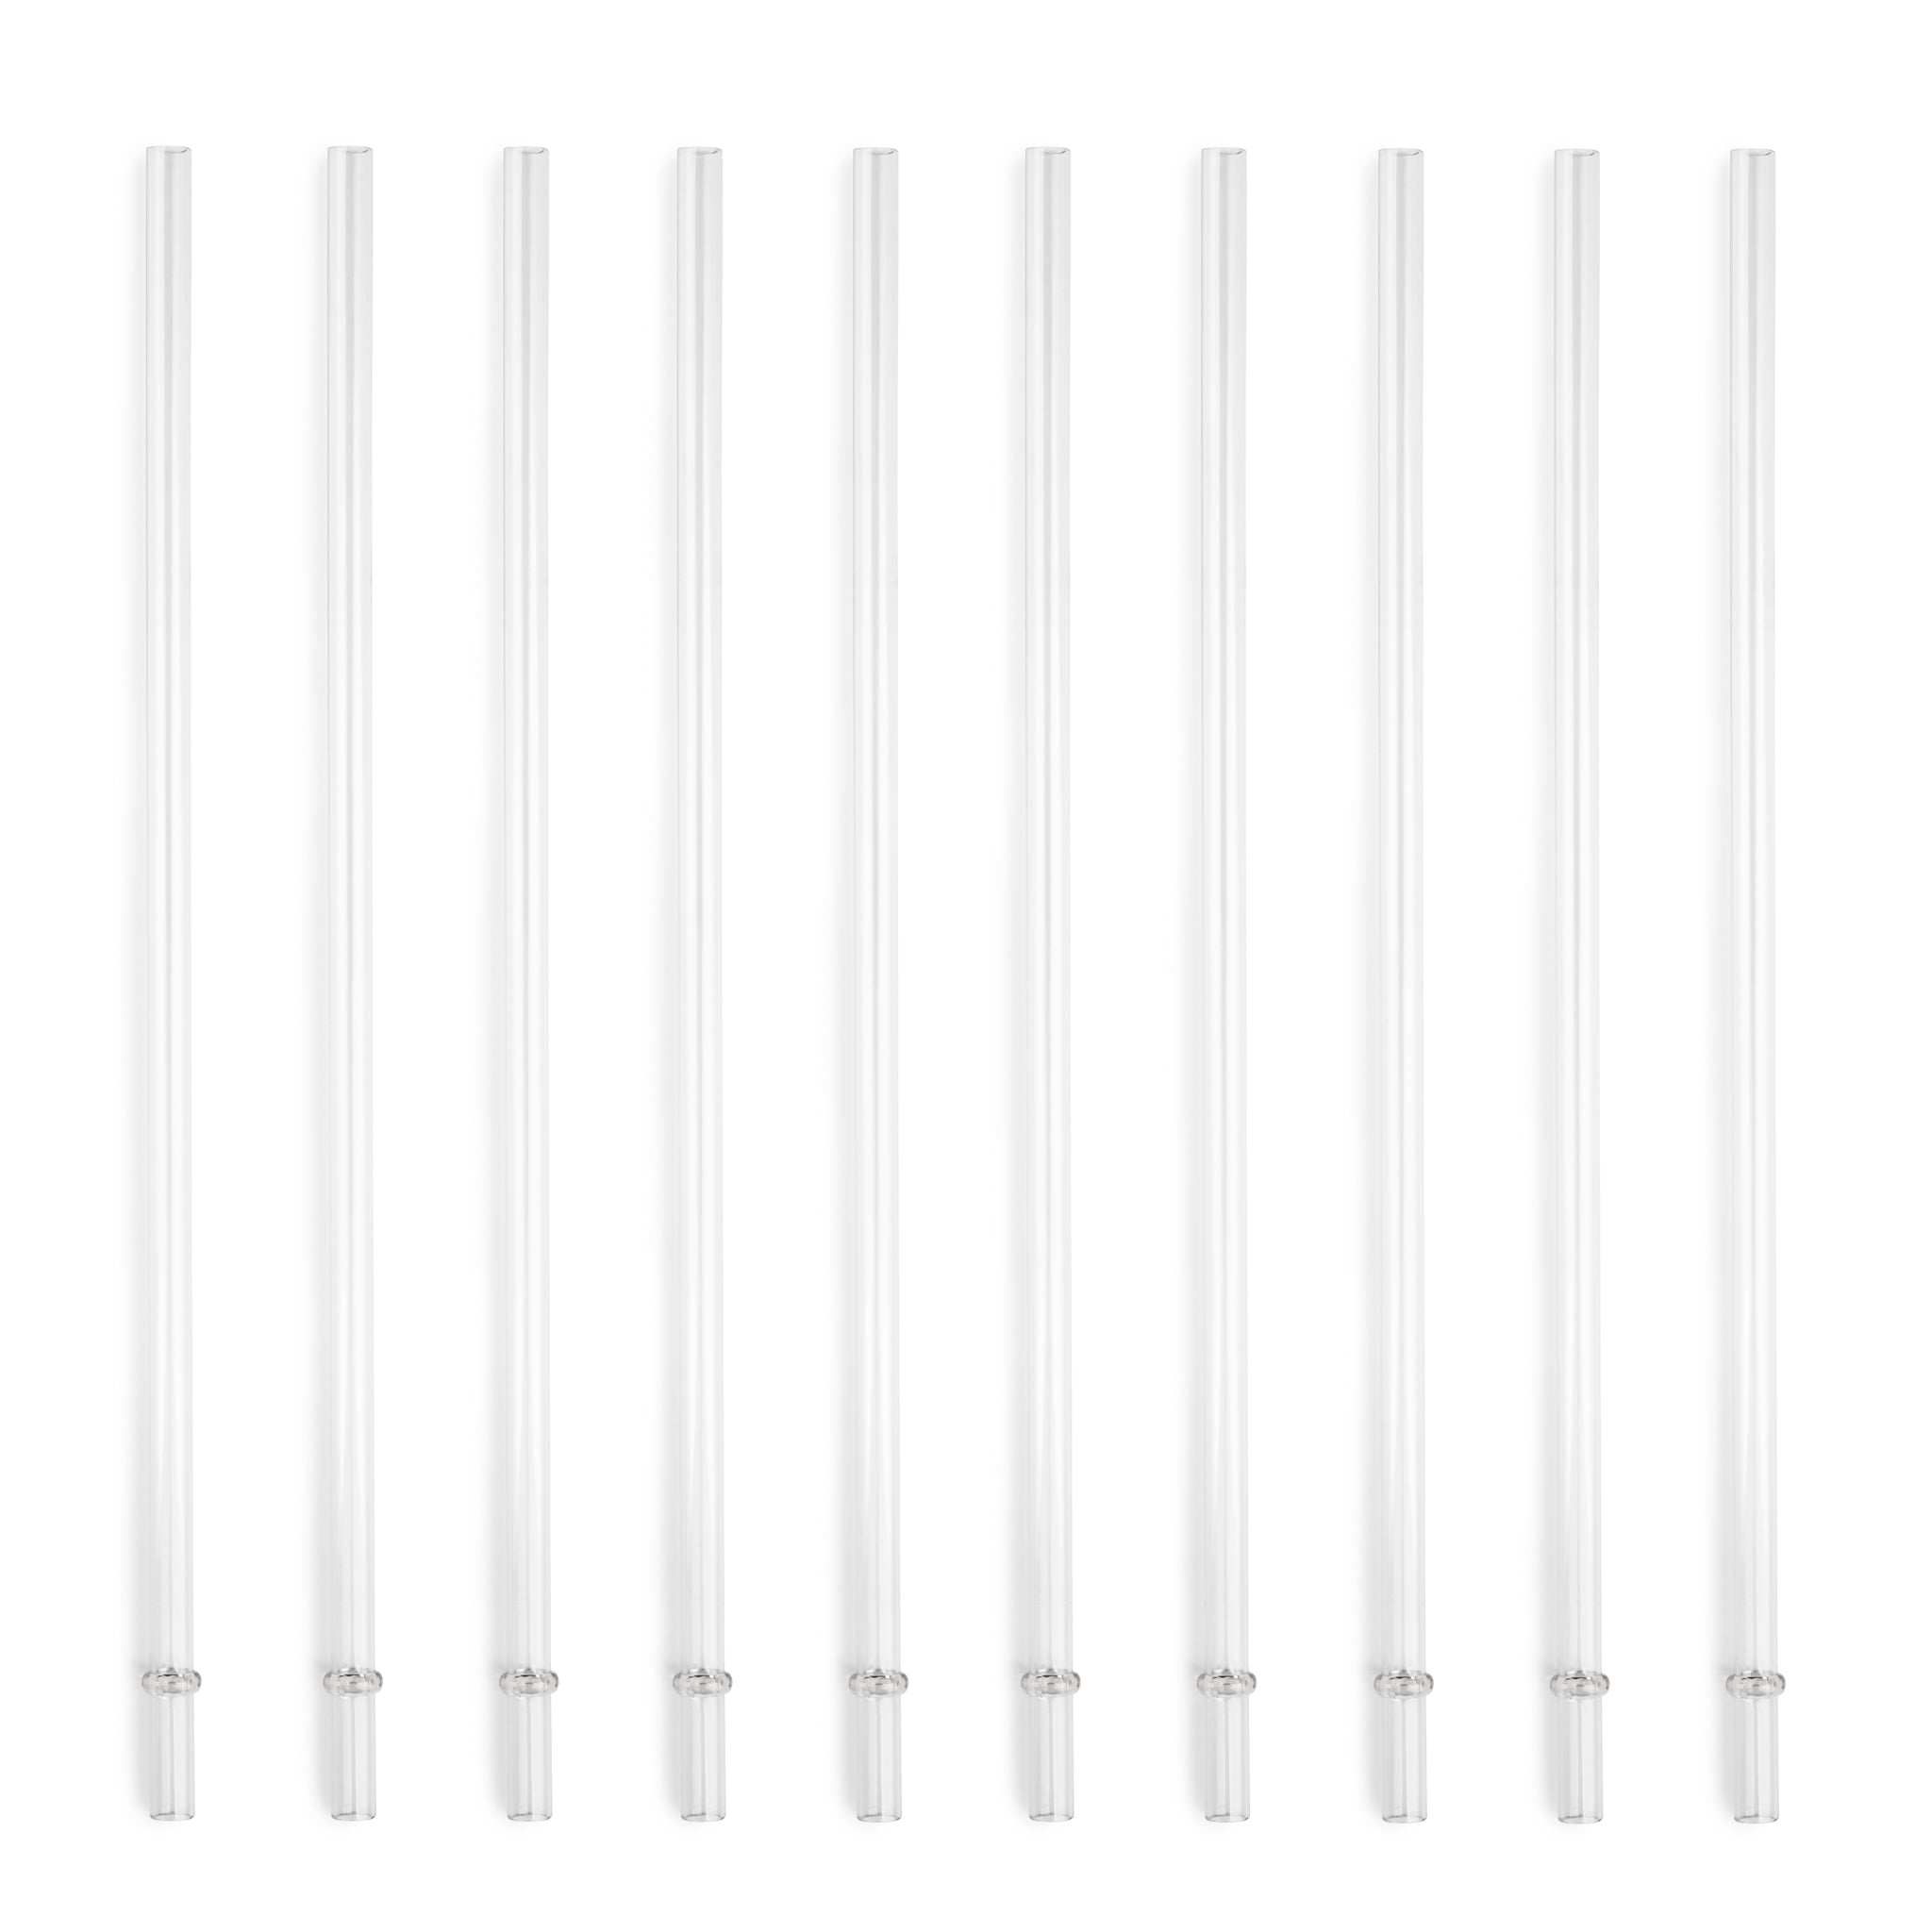 Manna 10 PC 24 oz Chilly Tumbler Replacement Straw Set